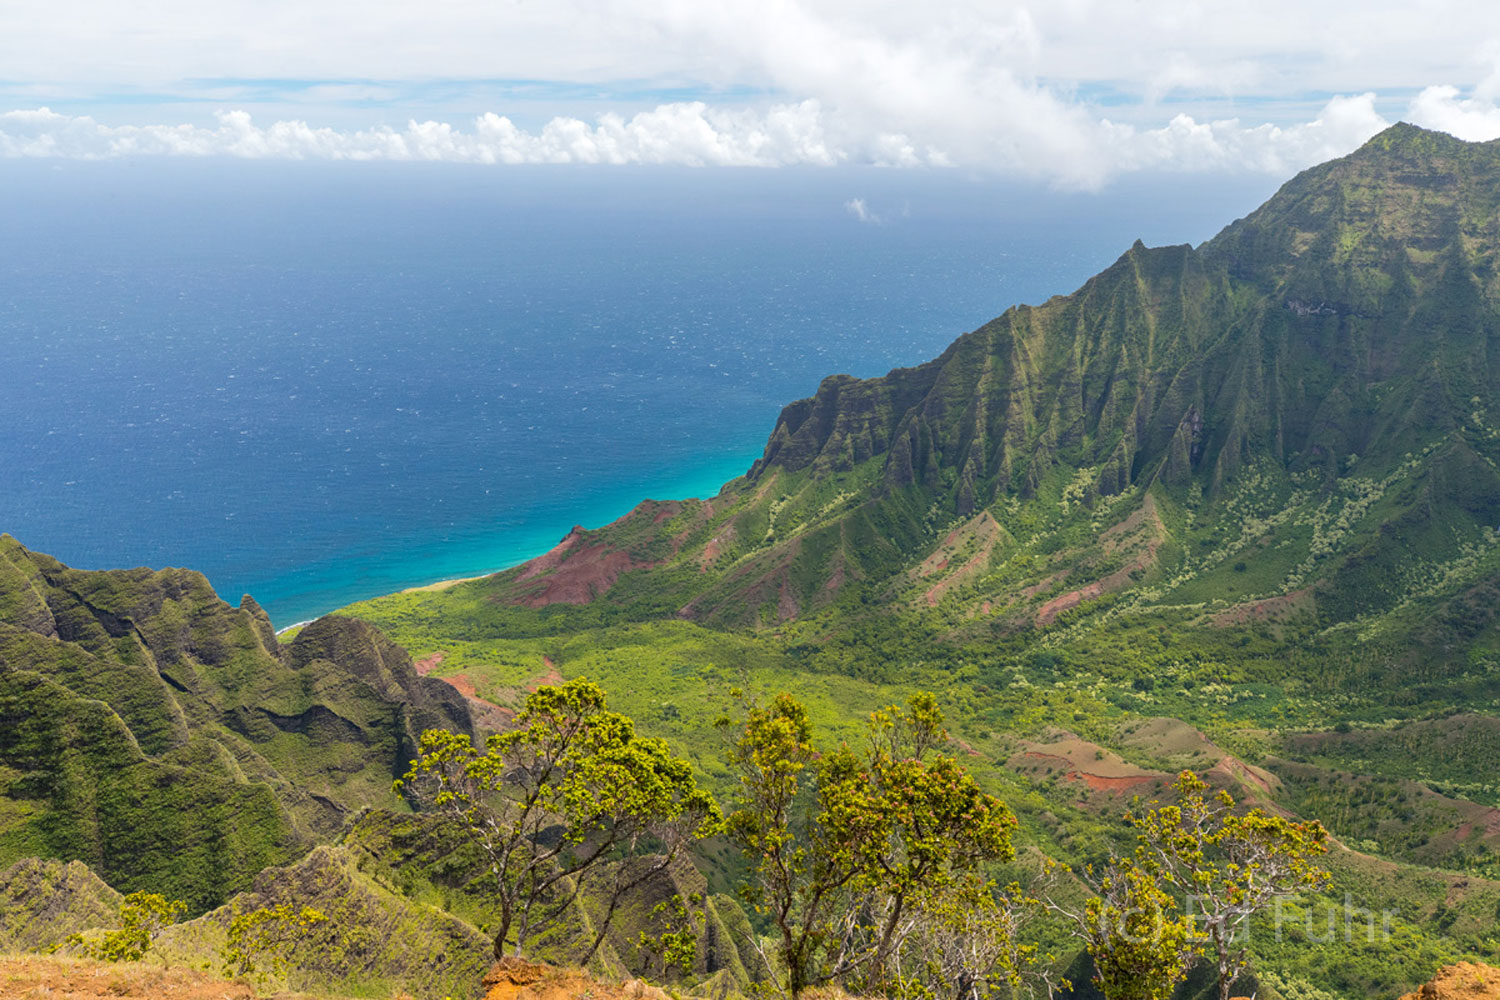 The Kalalau Valley is seen from high above along the narrow and incomparable Kalepa Ridge Trail.